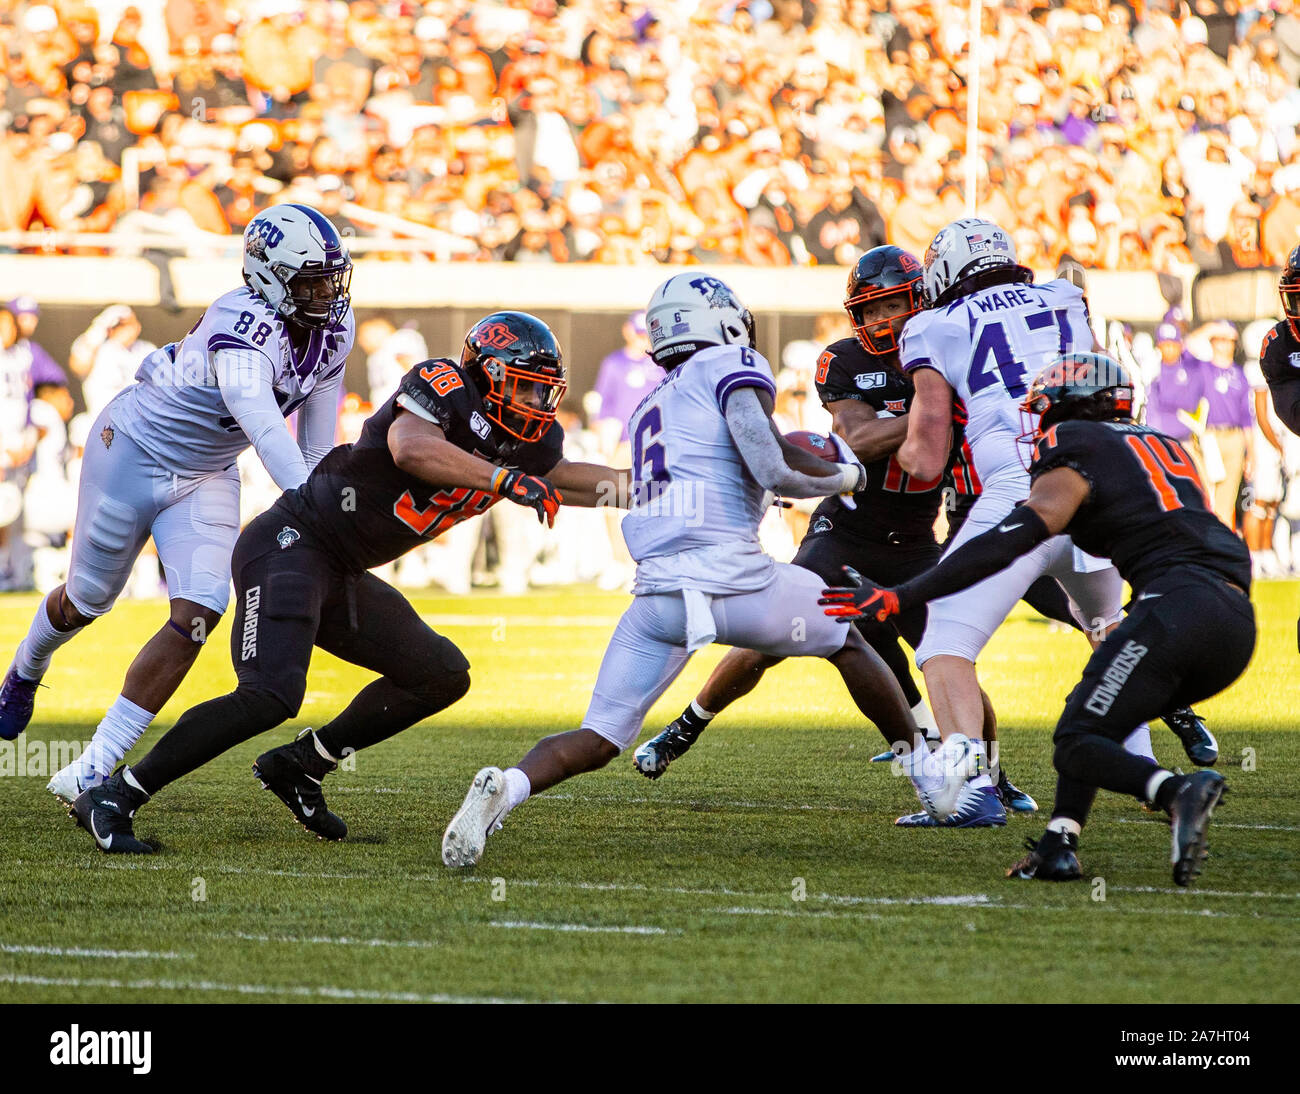 Stillwater, Oklahoma, USA. 2nd Nov, 2019. TCU Horned Frogs running back Darius Anderson (6) looking to split the Cowboys defense as Oklahoma State's linebacker Philip Redwine-Bryant (38) and cornerback Bryce Balous (14) look to stop the run during the game on Saturday, November 02, 2019 at Boone Pickens Stadium in Stillwater, Oklahoma. Credit: Nicholas Rutledge/ZUMA Wire/Alamy Live News Stock Photo